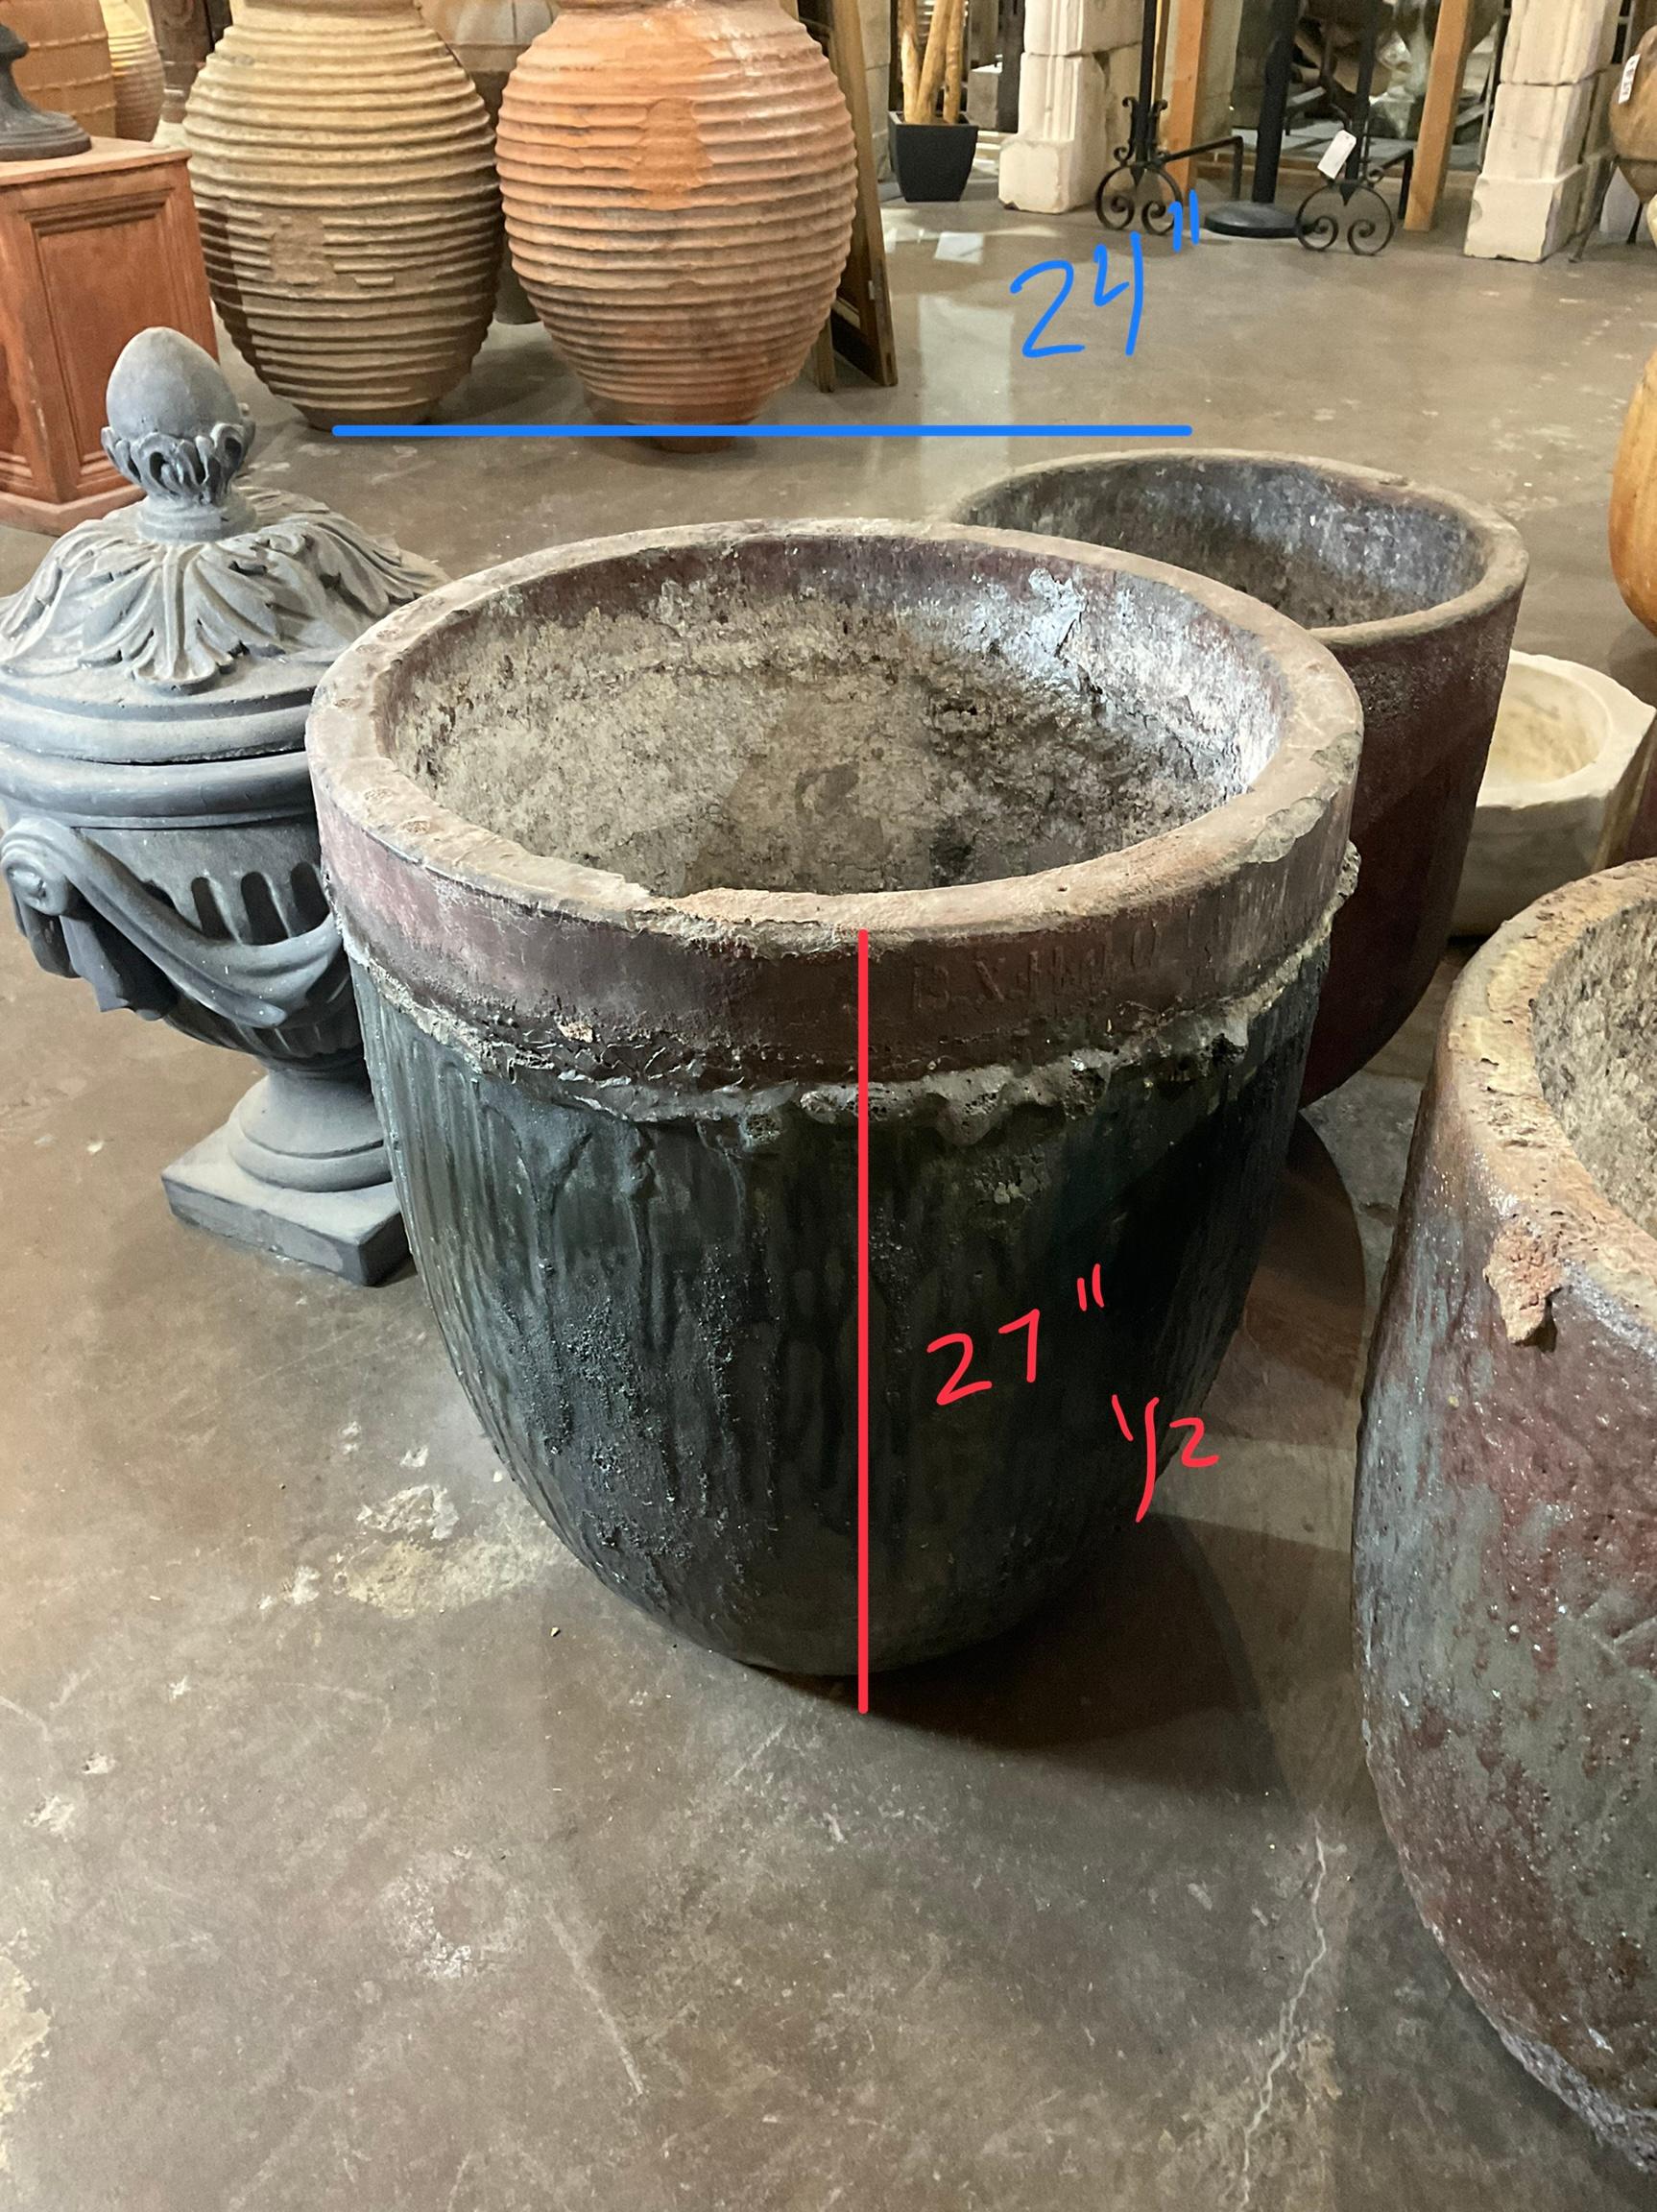 This French Pumice Stone Planter is a timeless, antique piece from the 17th century. Its durable and unique design makes it the perfect accent for any garden or home. This planter will bring a touch of European charm to your outdoor space.